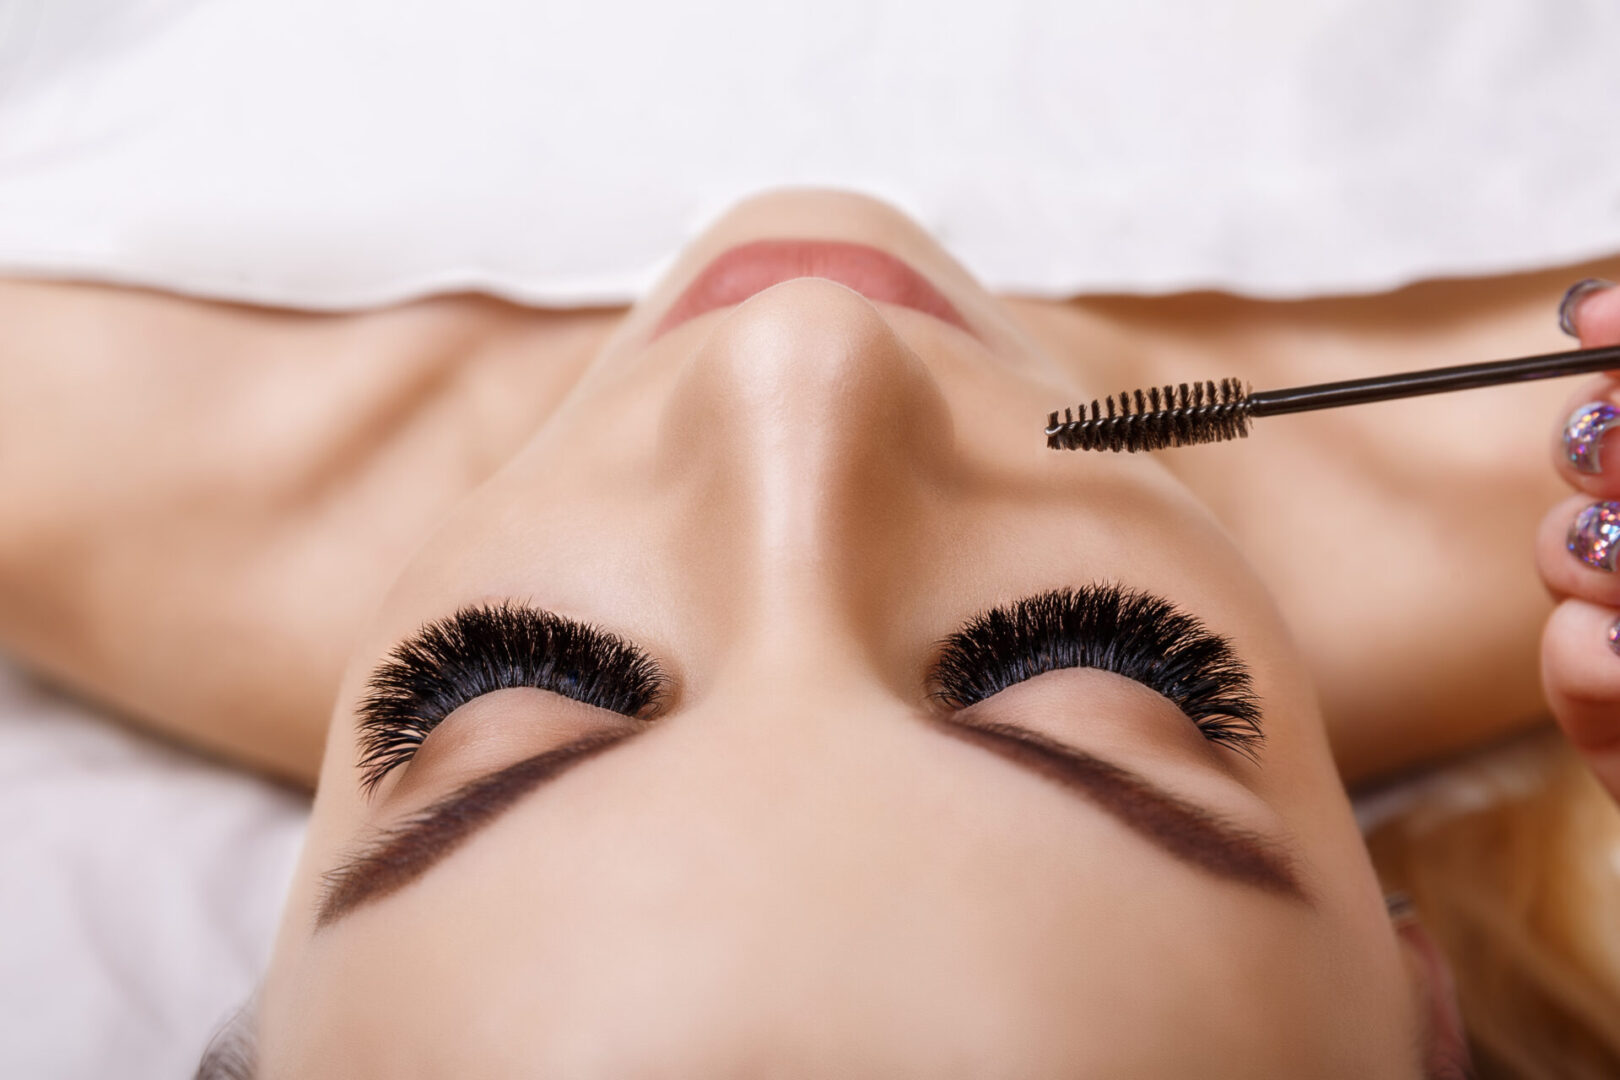 A woman with long eyelashes getting her brows trimmed.